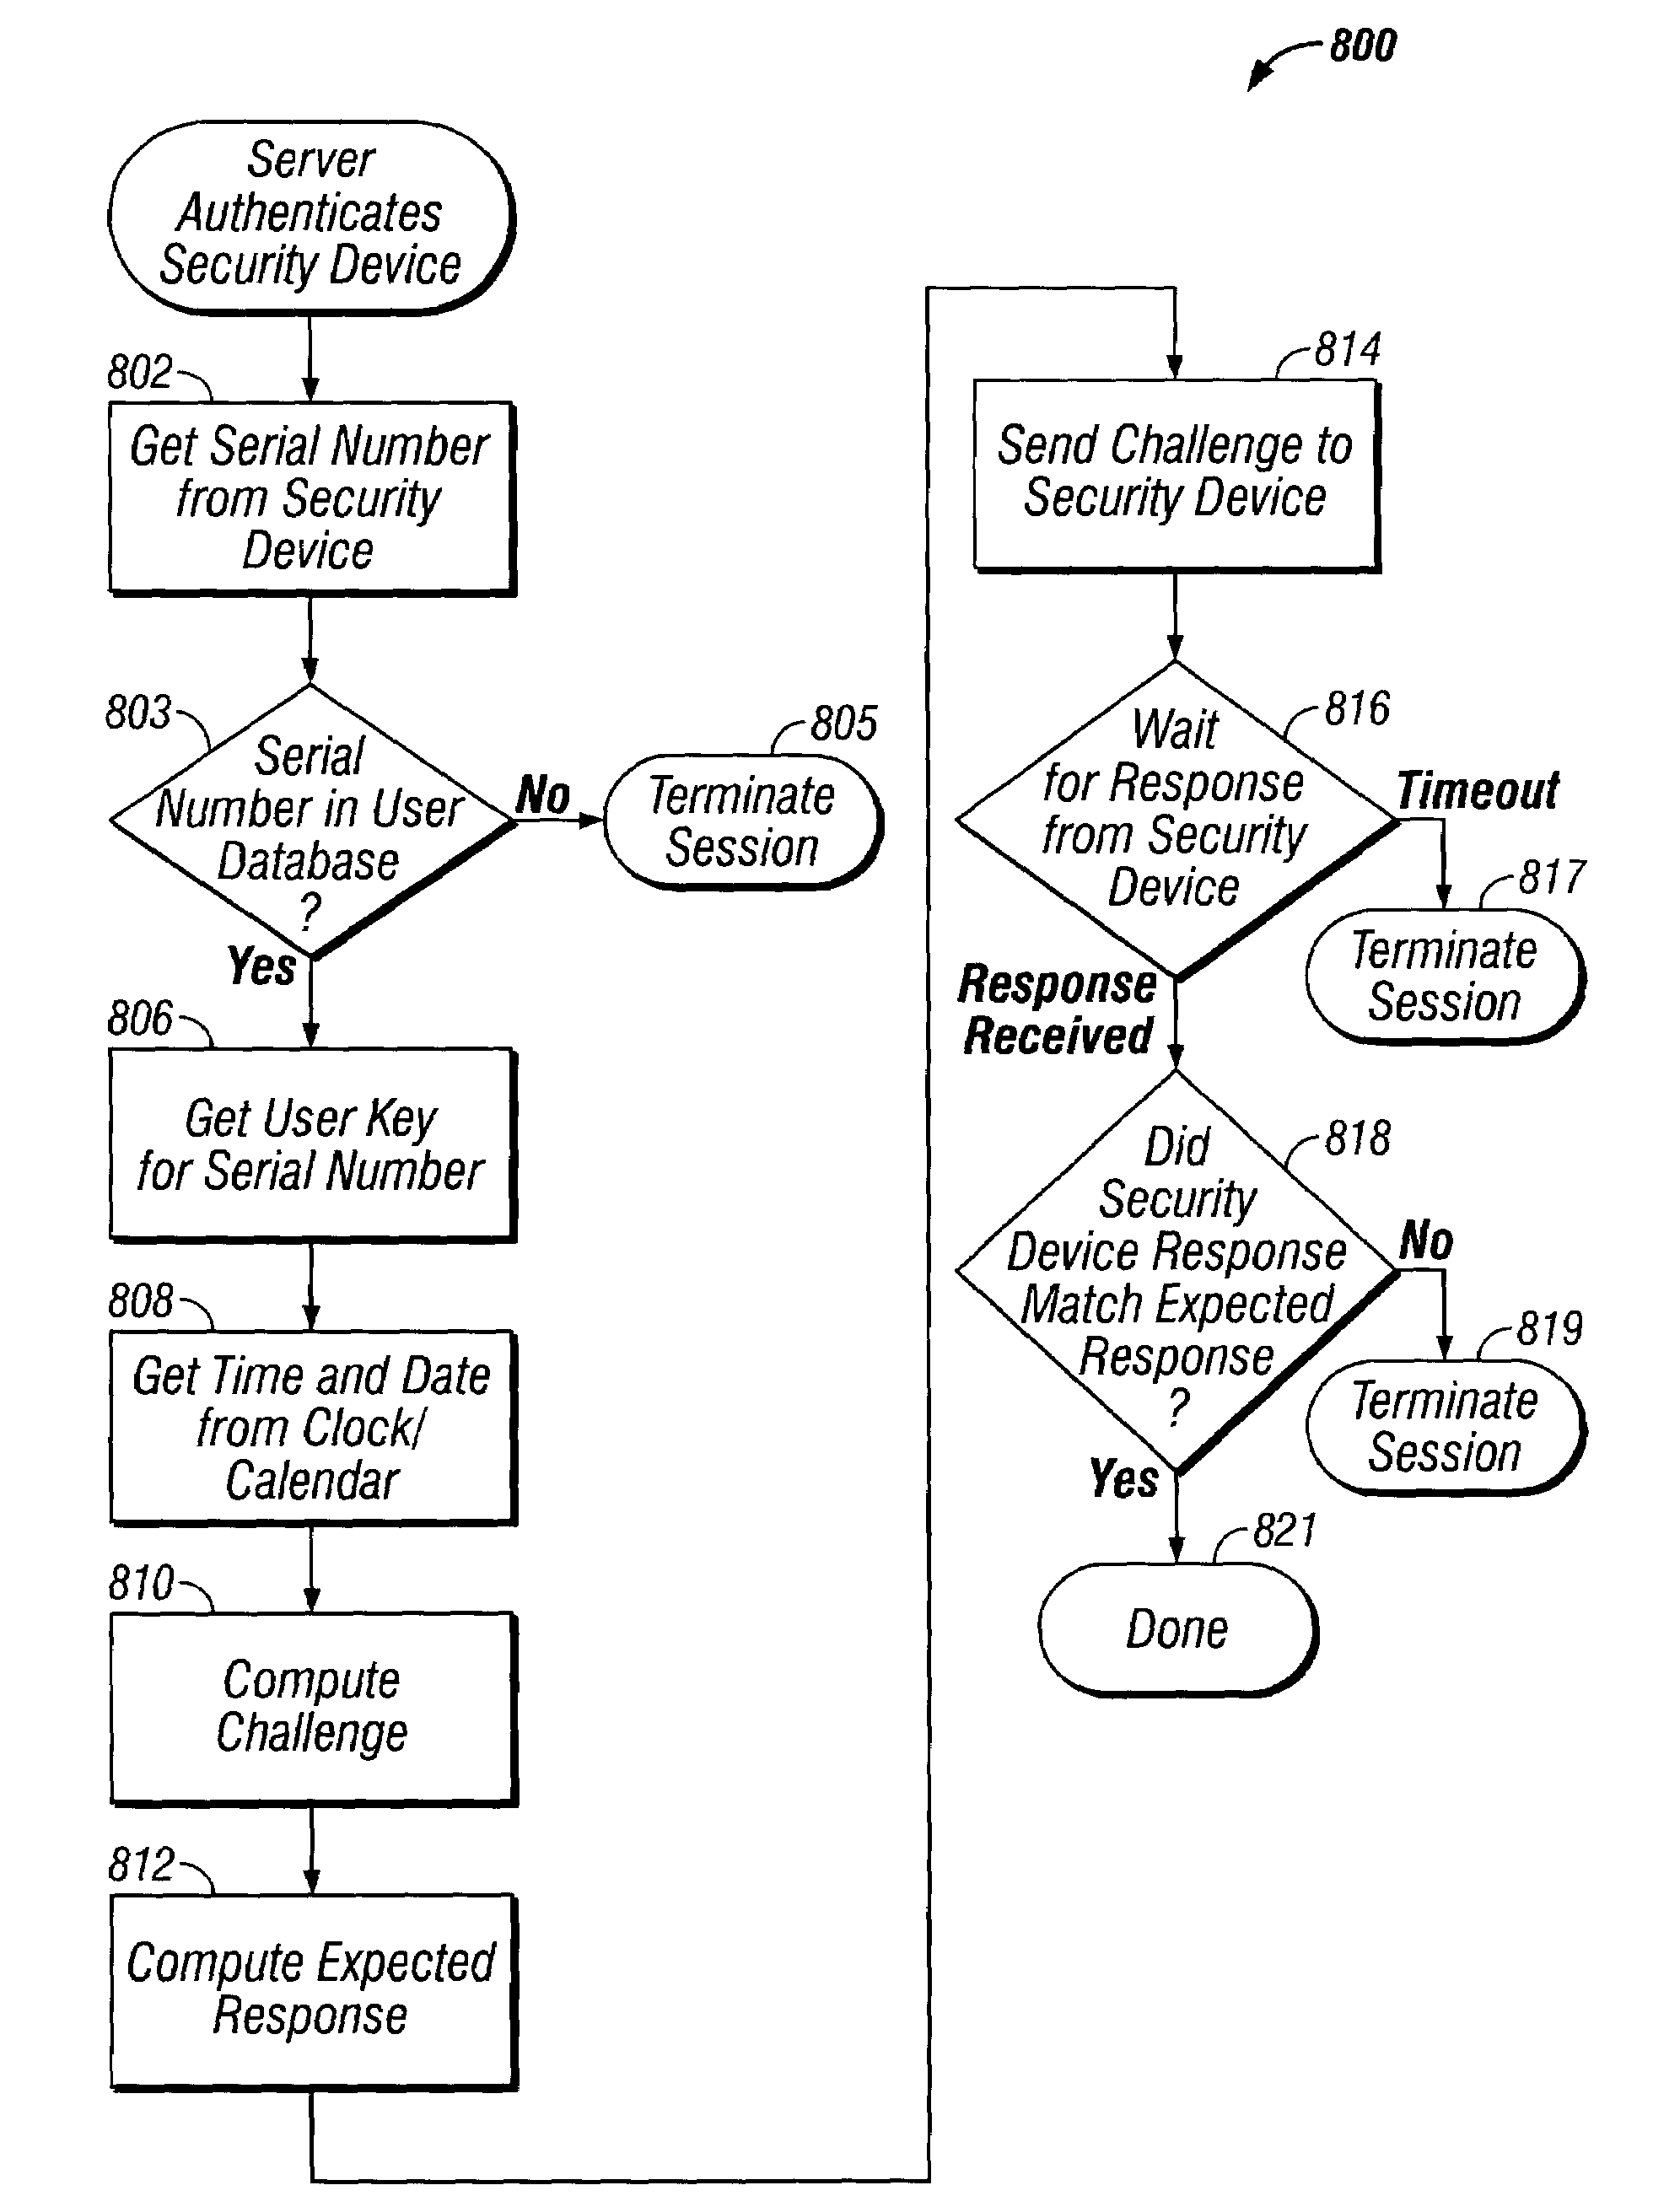 System, device, and method for providing secure electronic commerce transactions